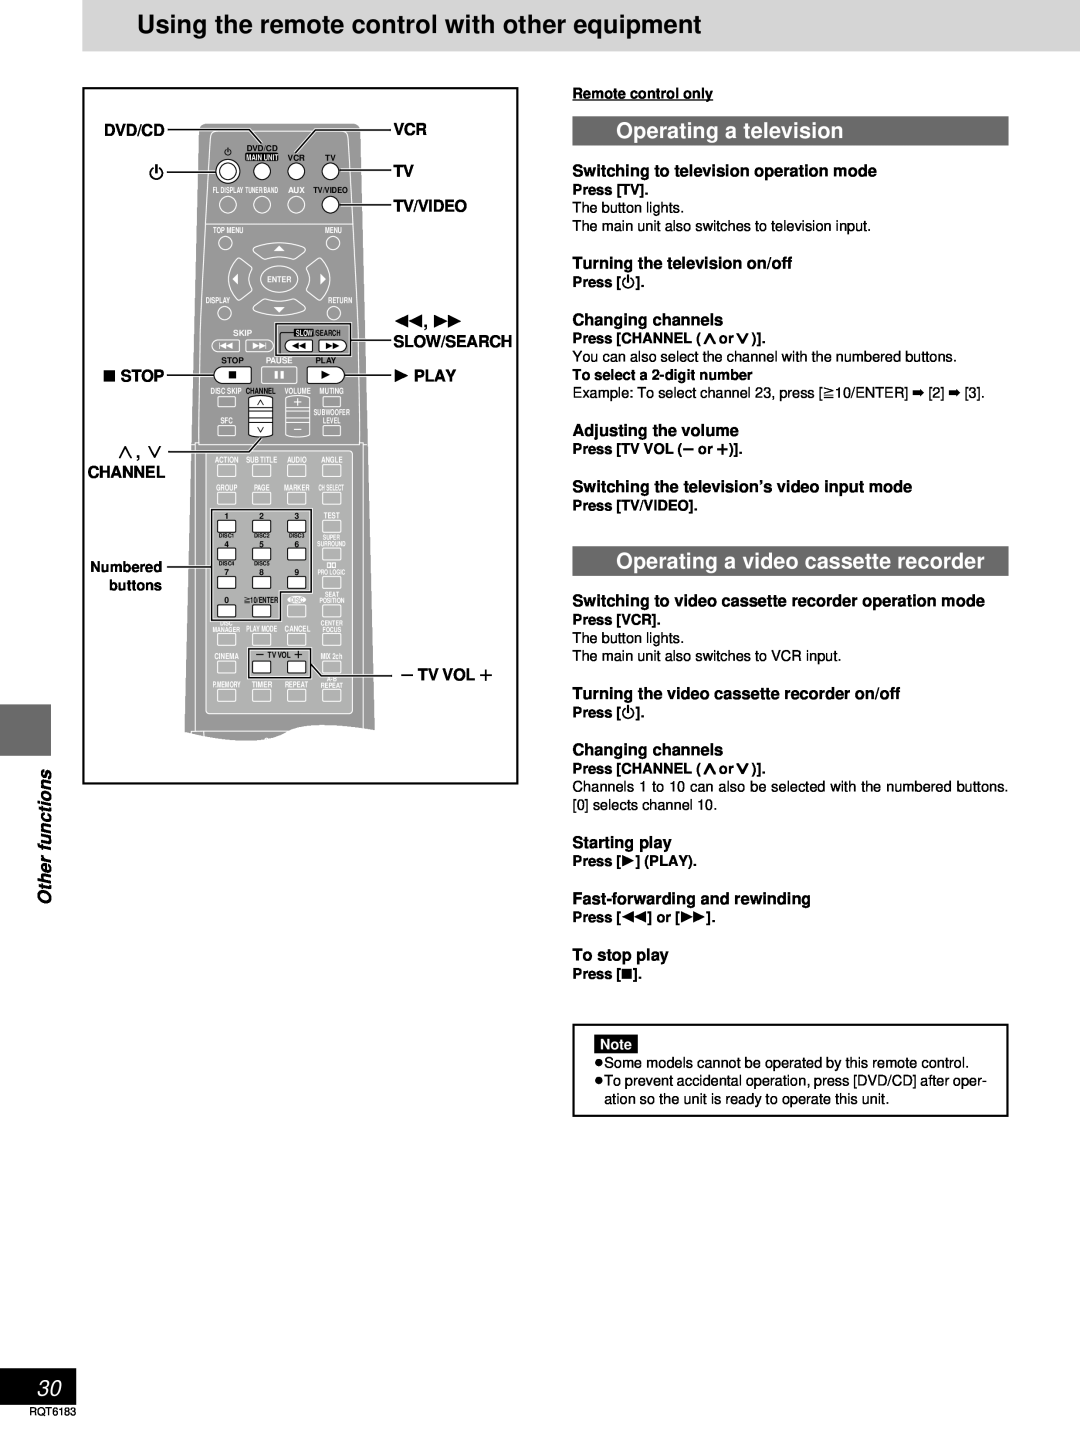 Panasonic SC-HT95 Using the remote control with other equipment, Operating a television, Other functions, Tv/Video, Play 